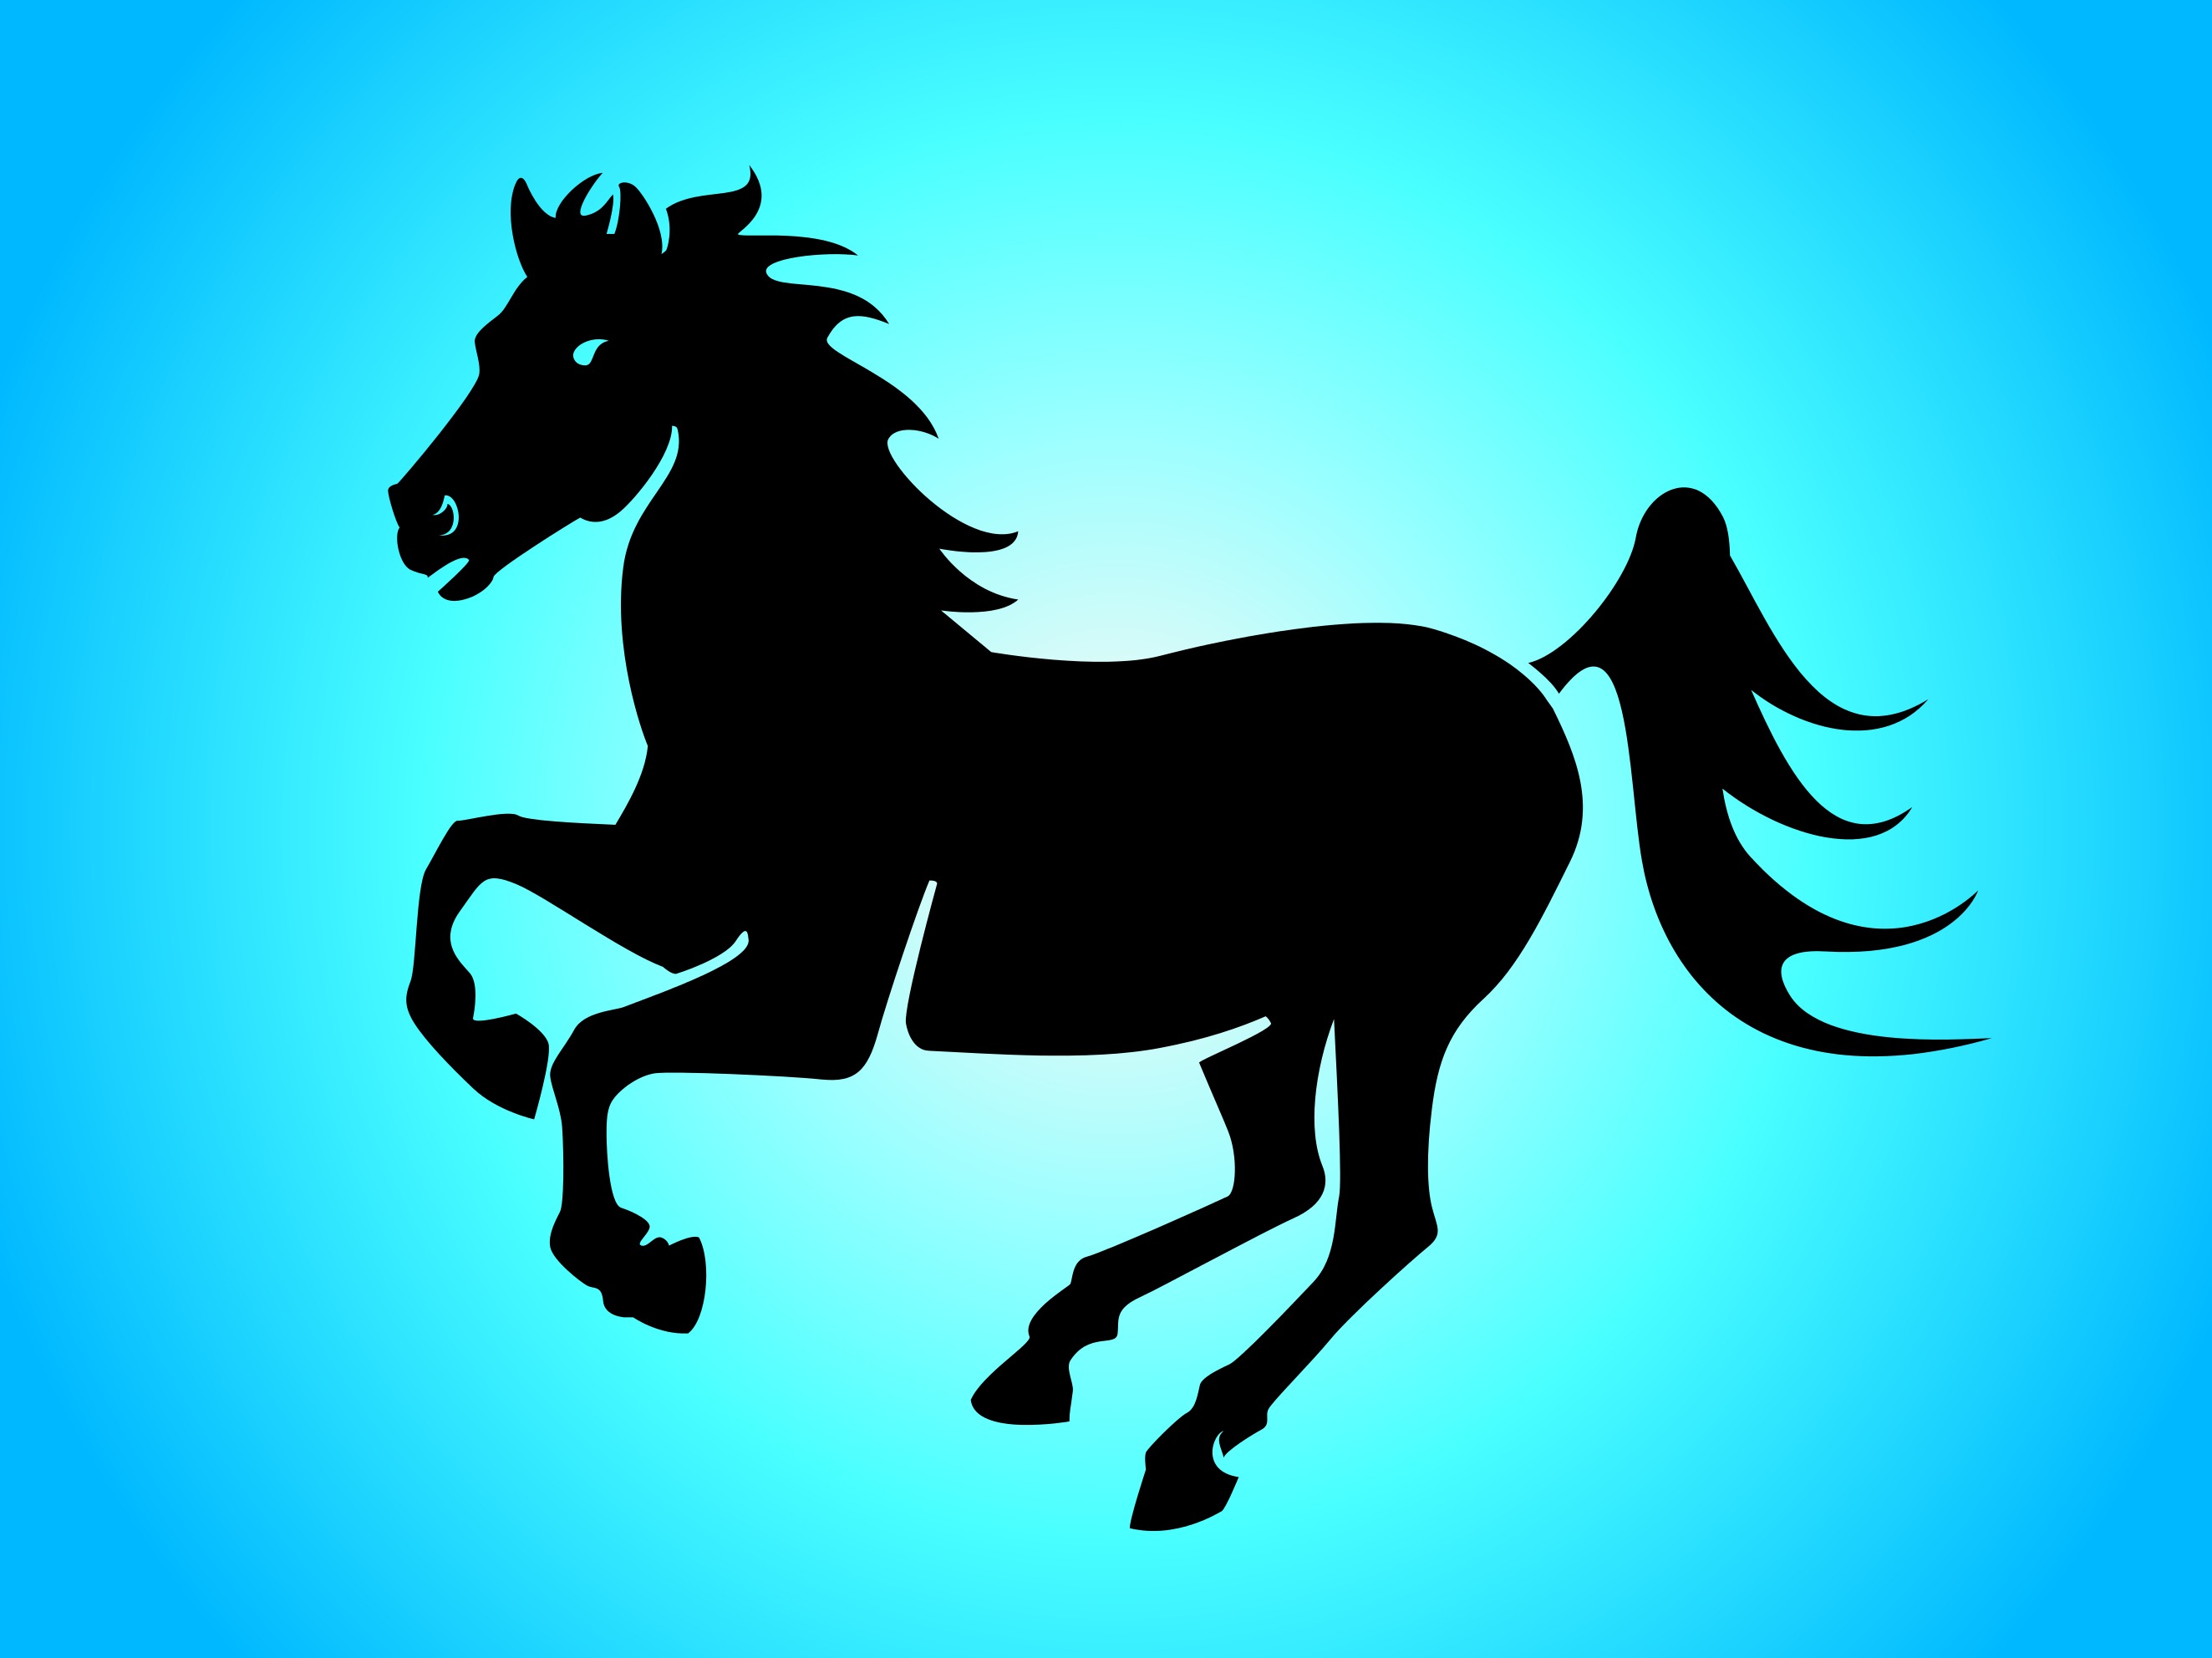 Simple Horse Graphic Download Free Vector Art, Stock